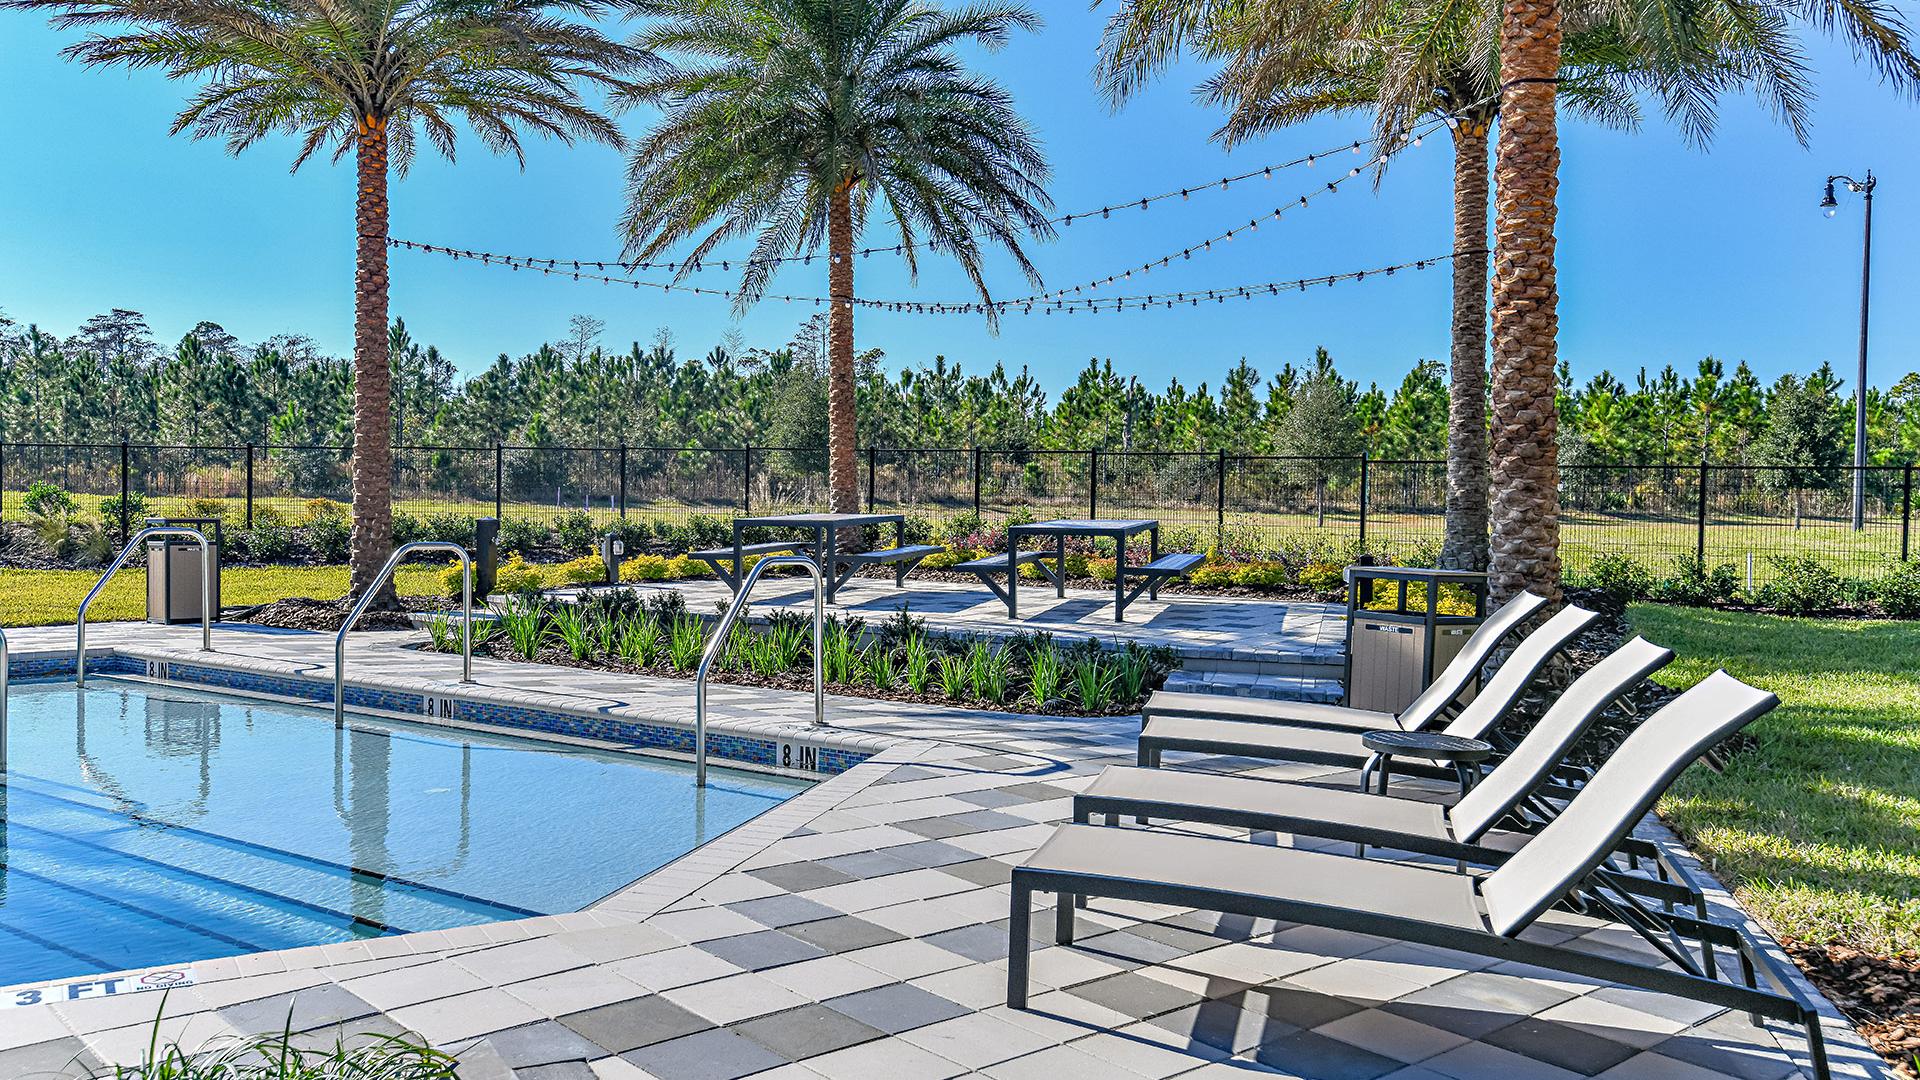 Resort-style pool at the Recharge amenity center